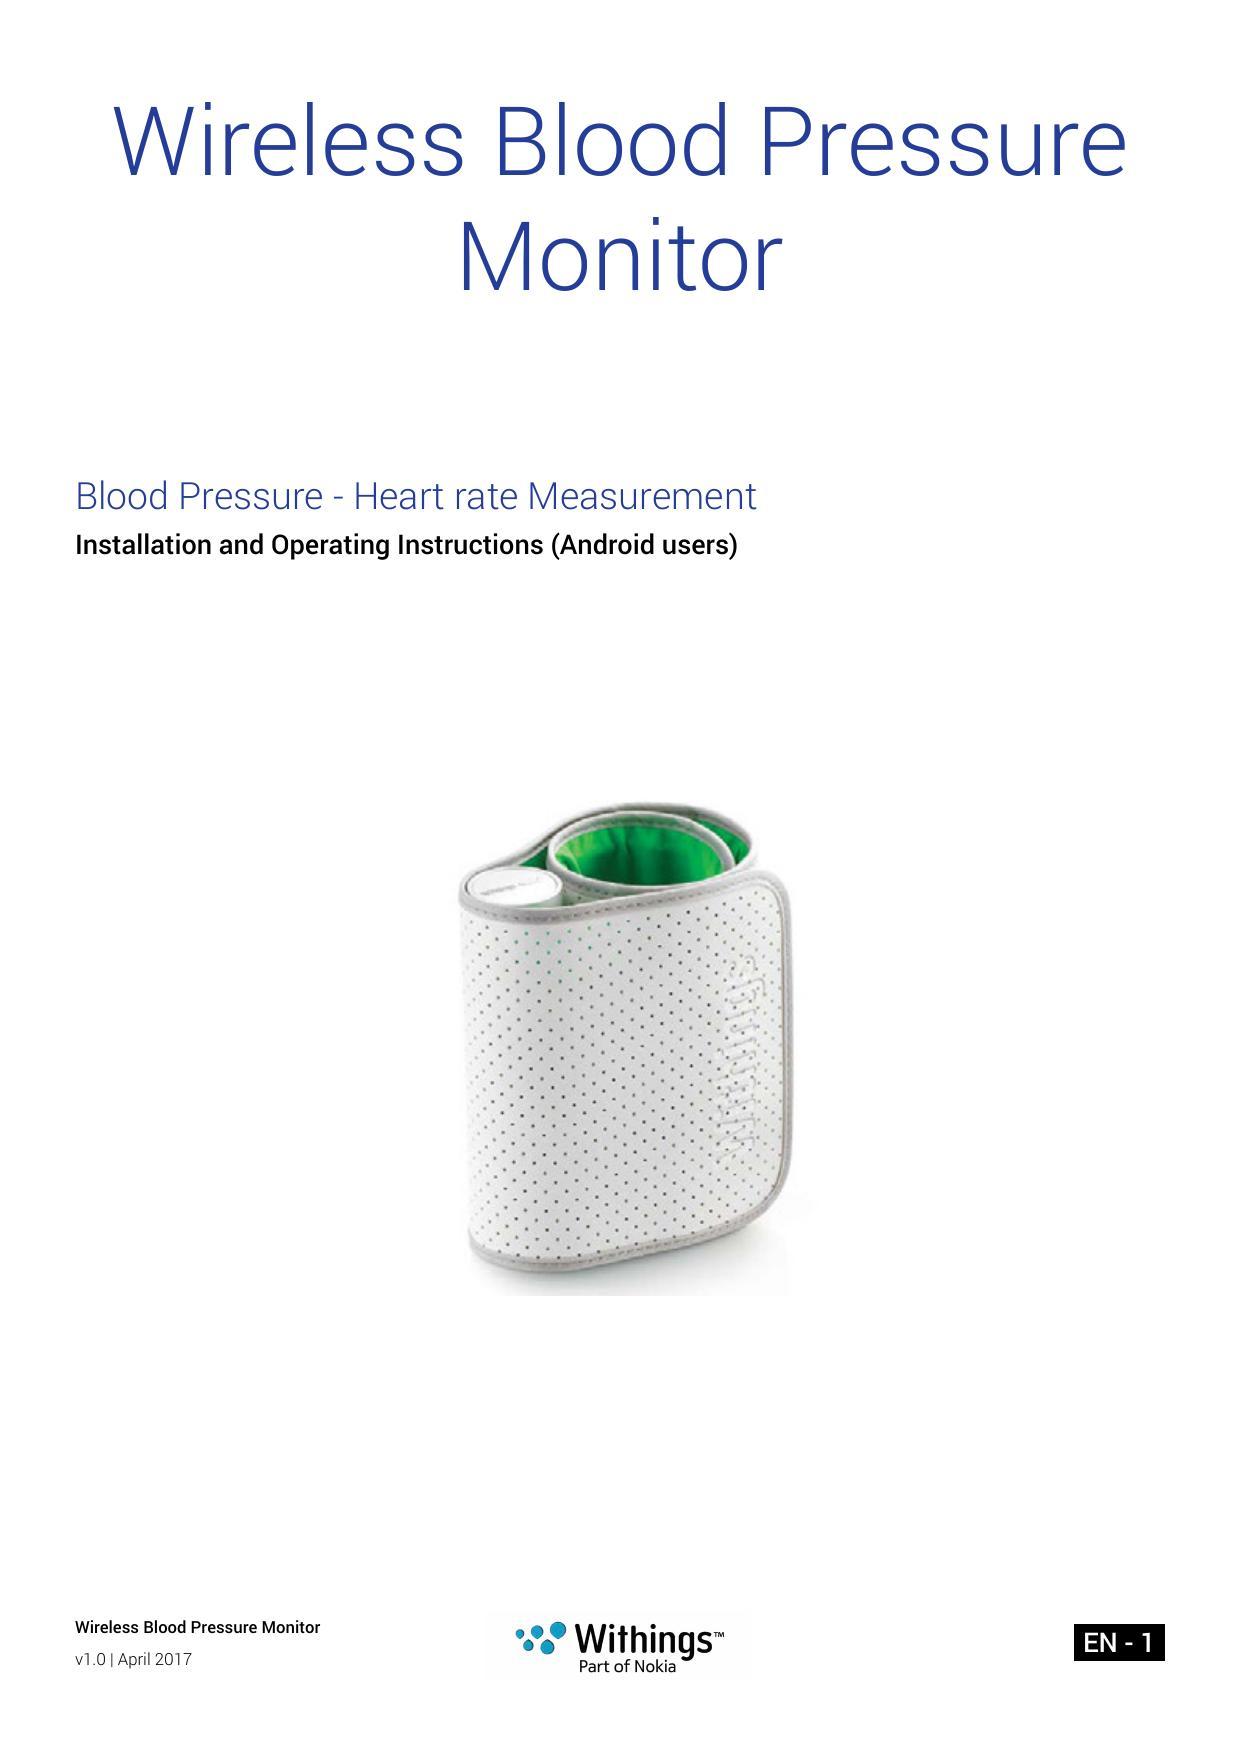 withings-wireless-blood-pressure-monitor-v10-user-manual-for-android-users.pdf